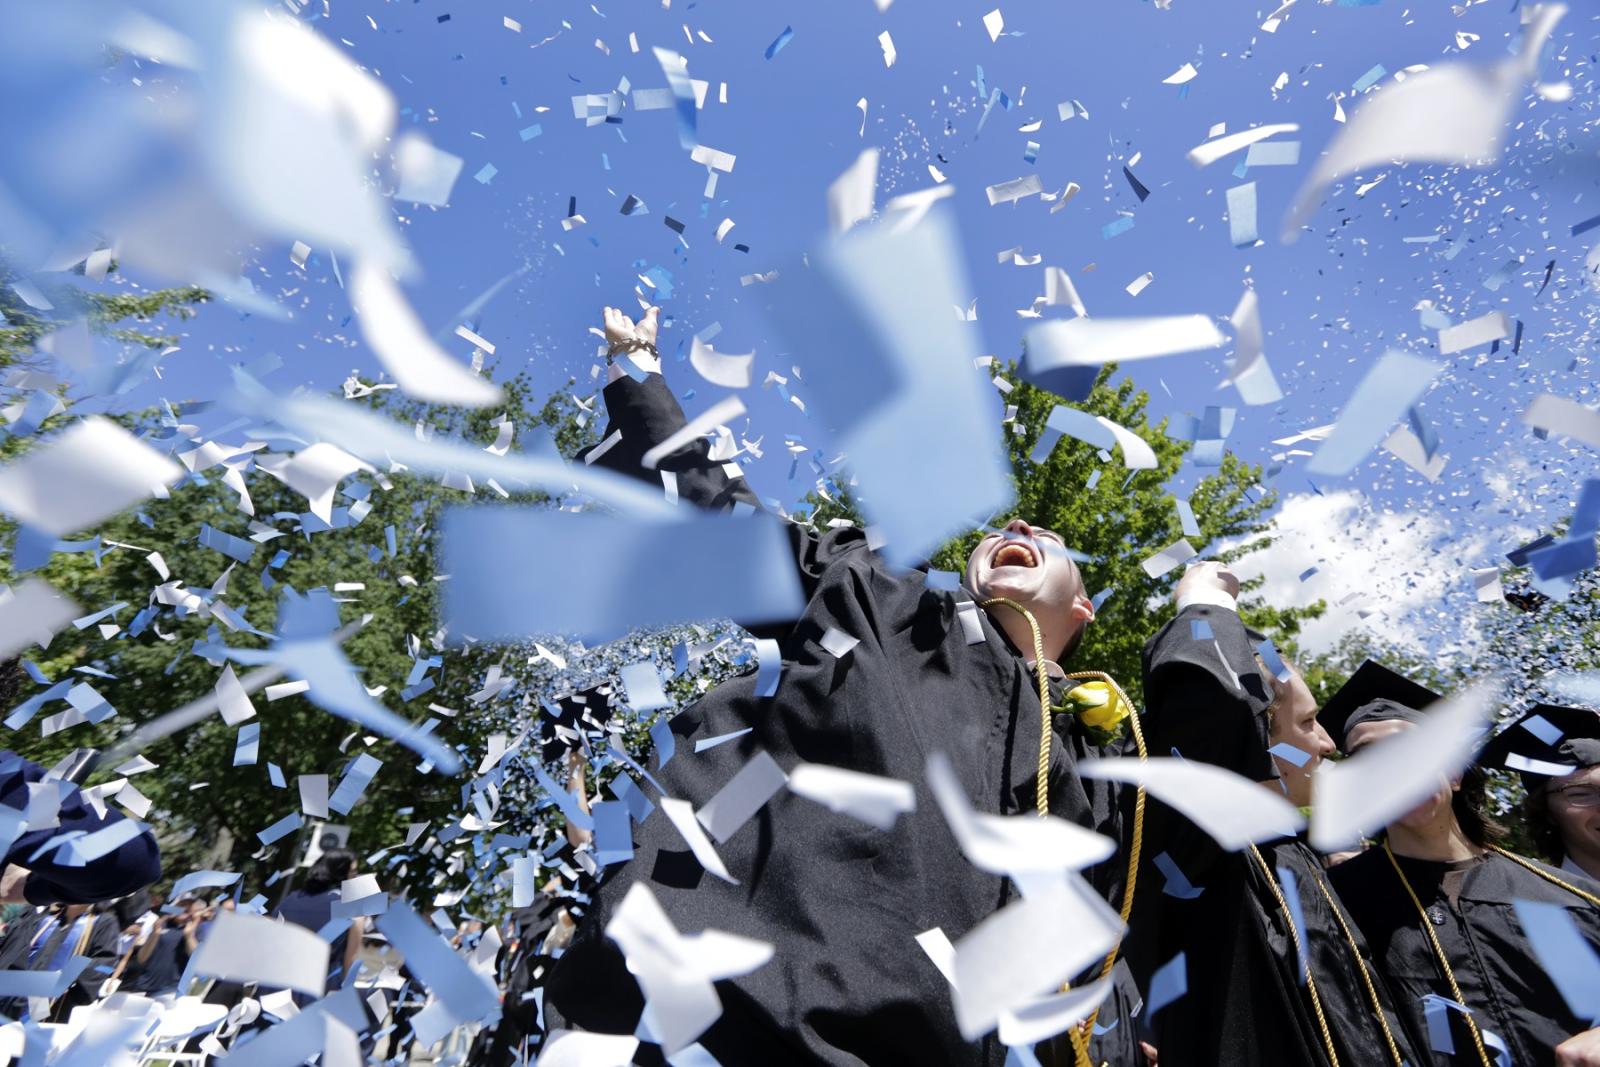 Confetti and graduation caps fly as graduates celebrate at the close of Commencement.